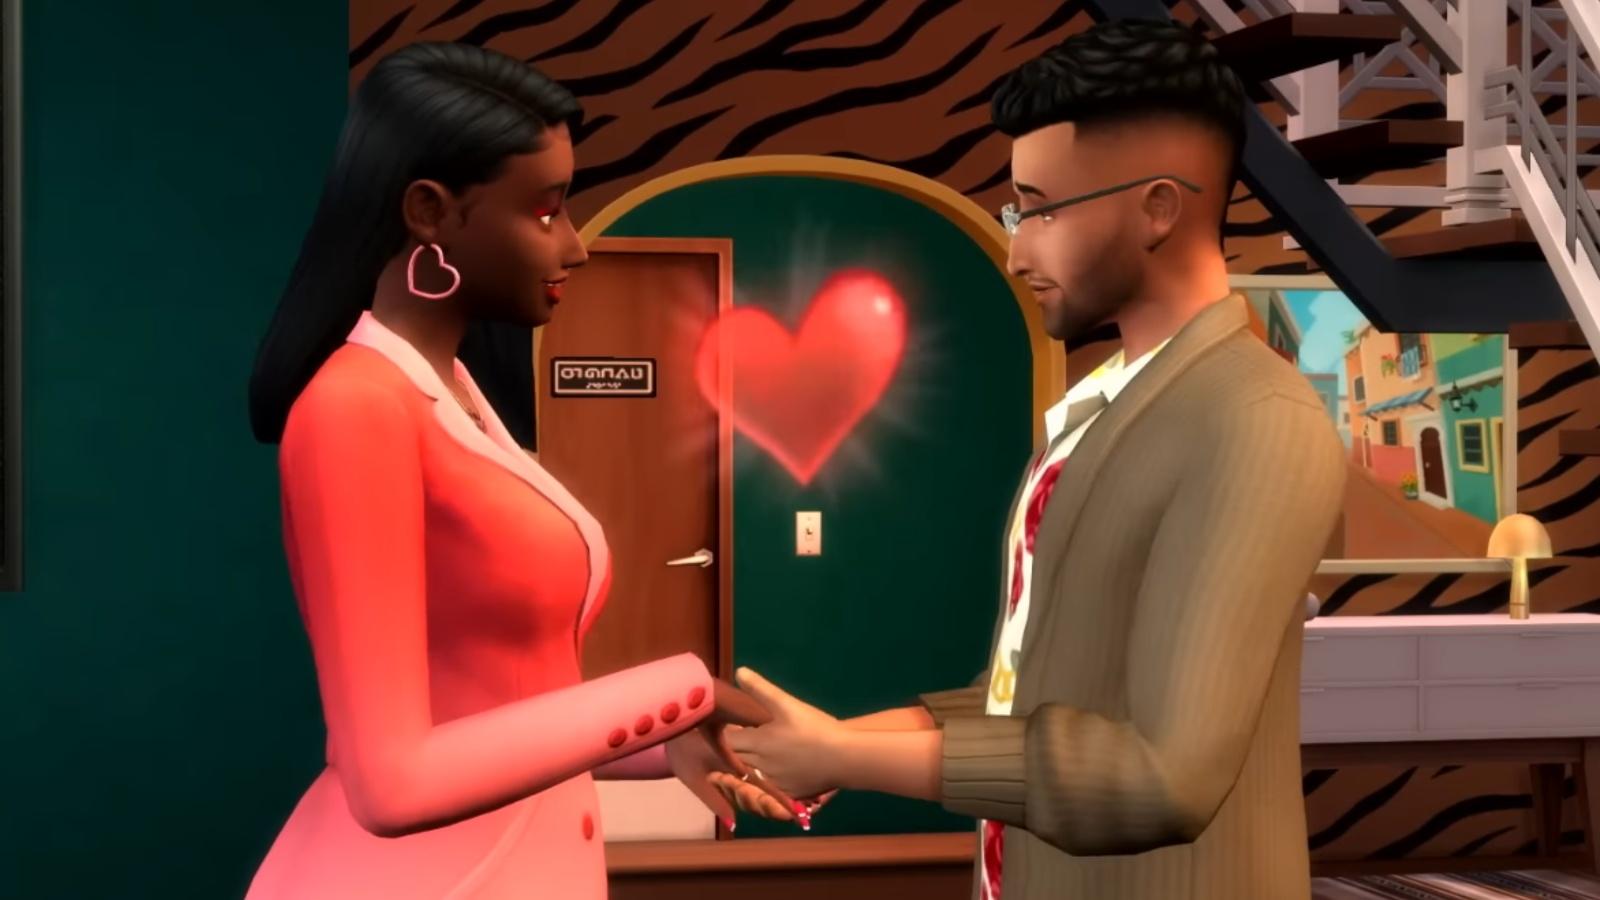 A screenshot featuring The Sims 4 Lovestruck expansion pack.